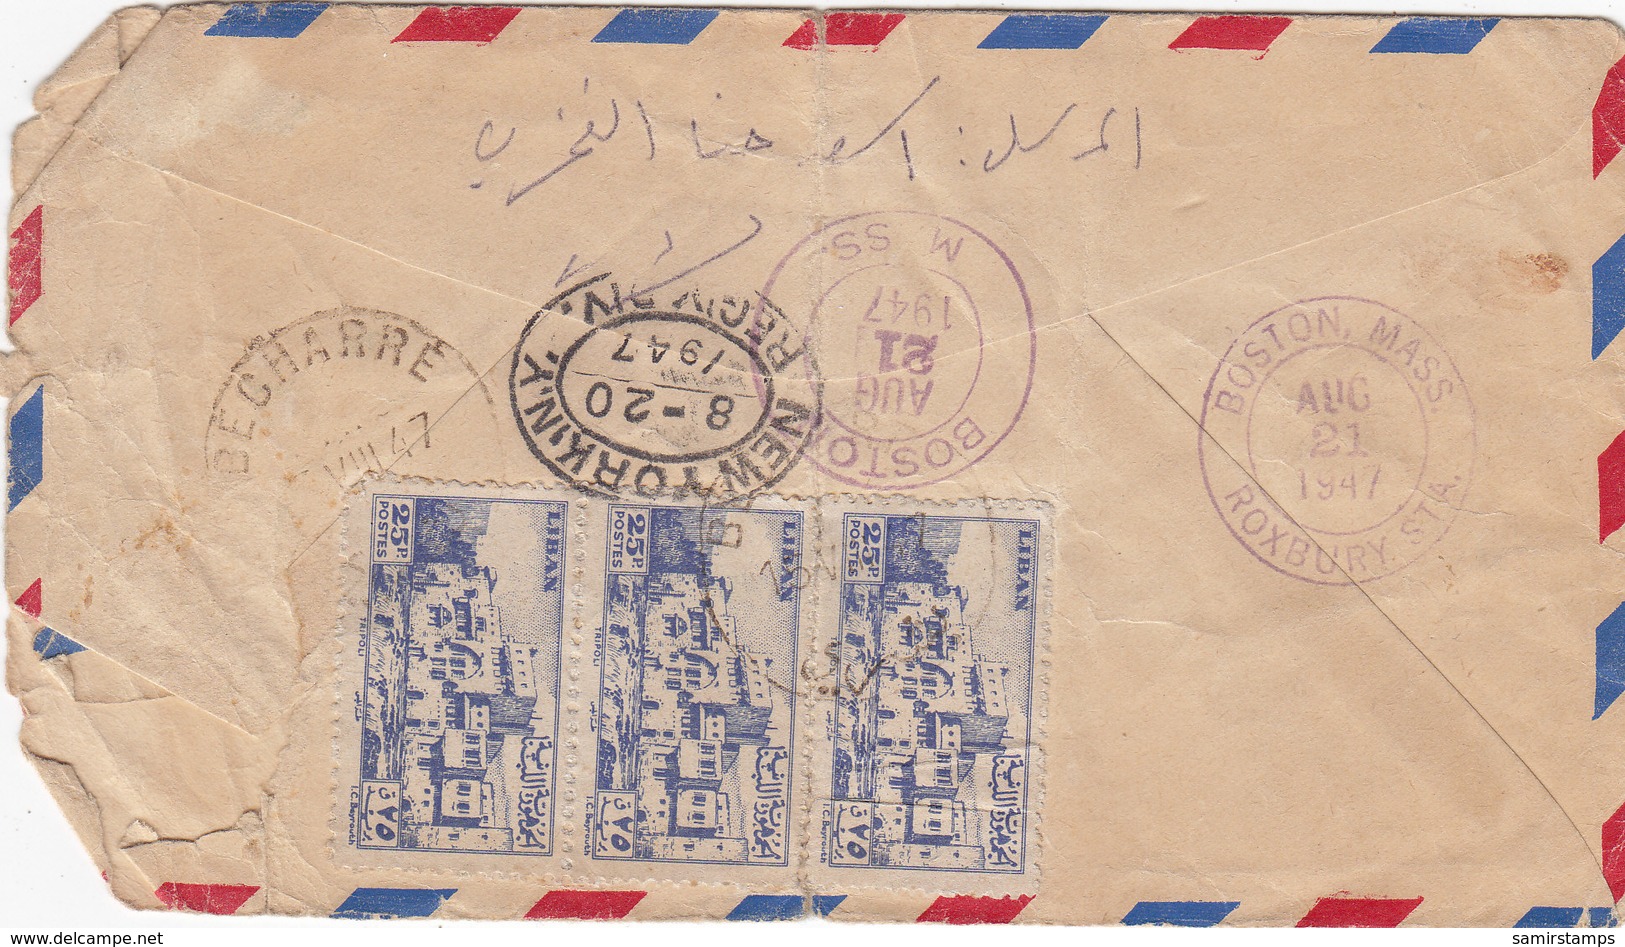 Lebanon-Liban Registr.com.cover BECHARE Clear Cancel- To USA- 2nd Scan- Red. Pricer - SKRILL PAY ONLY - Libanon